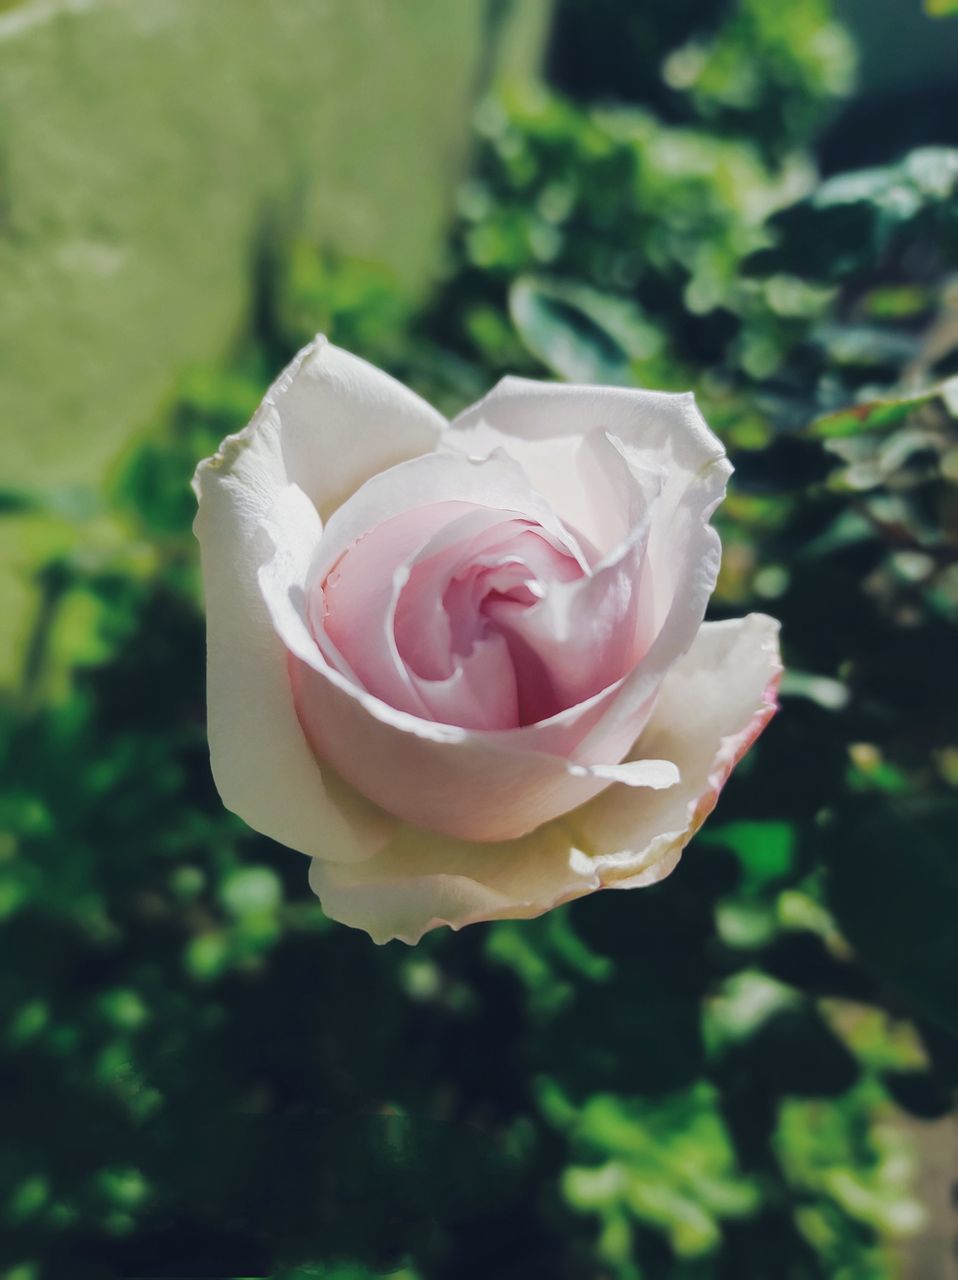 flower, plant, flowering plant, rose, beauty in nature, pink, freshness, petal, nature, close-up, flower head, garden roses, fragility, inflorescence, focus on foreground, leaf, plant part, no people, outdoors, rose - flower, green, growth, day, yellow